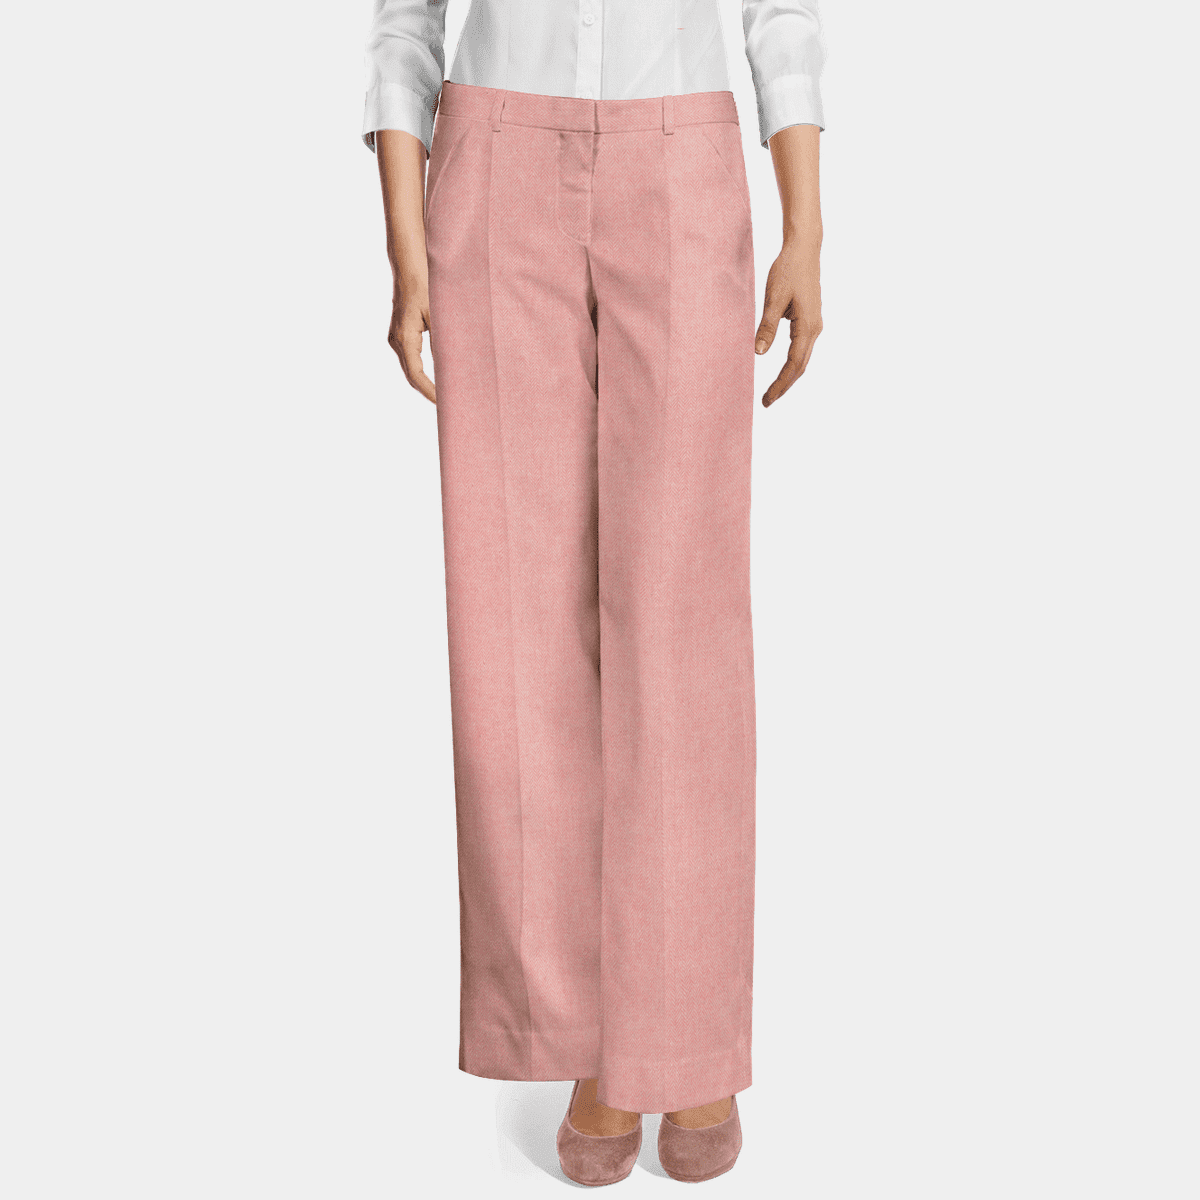 Pink high waisted flat-front stretch Dress Pants